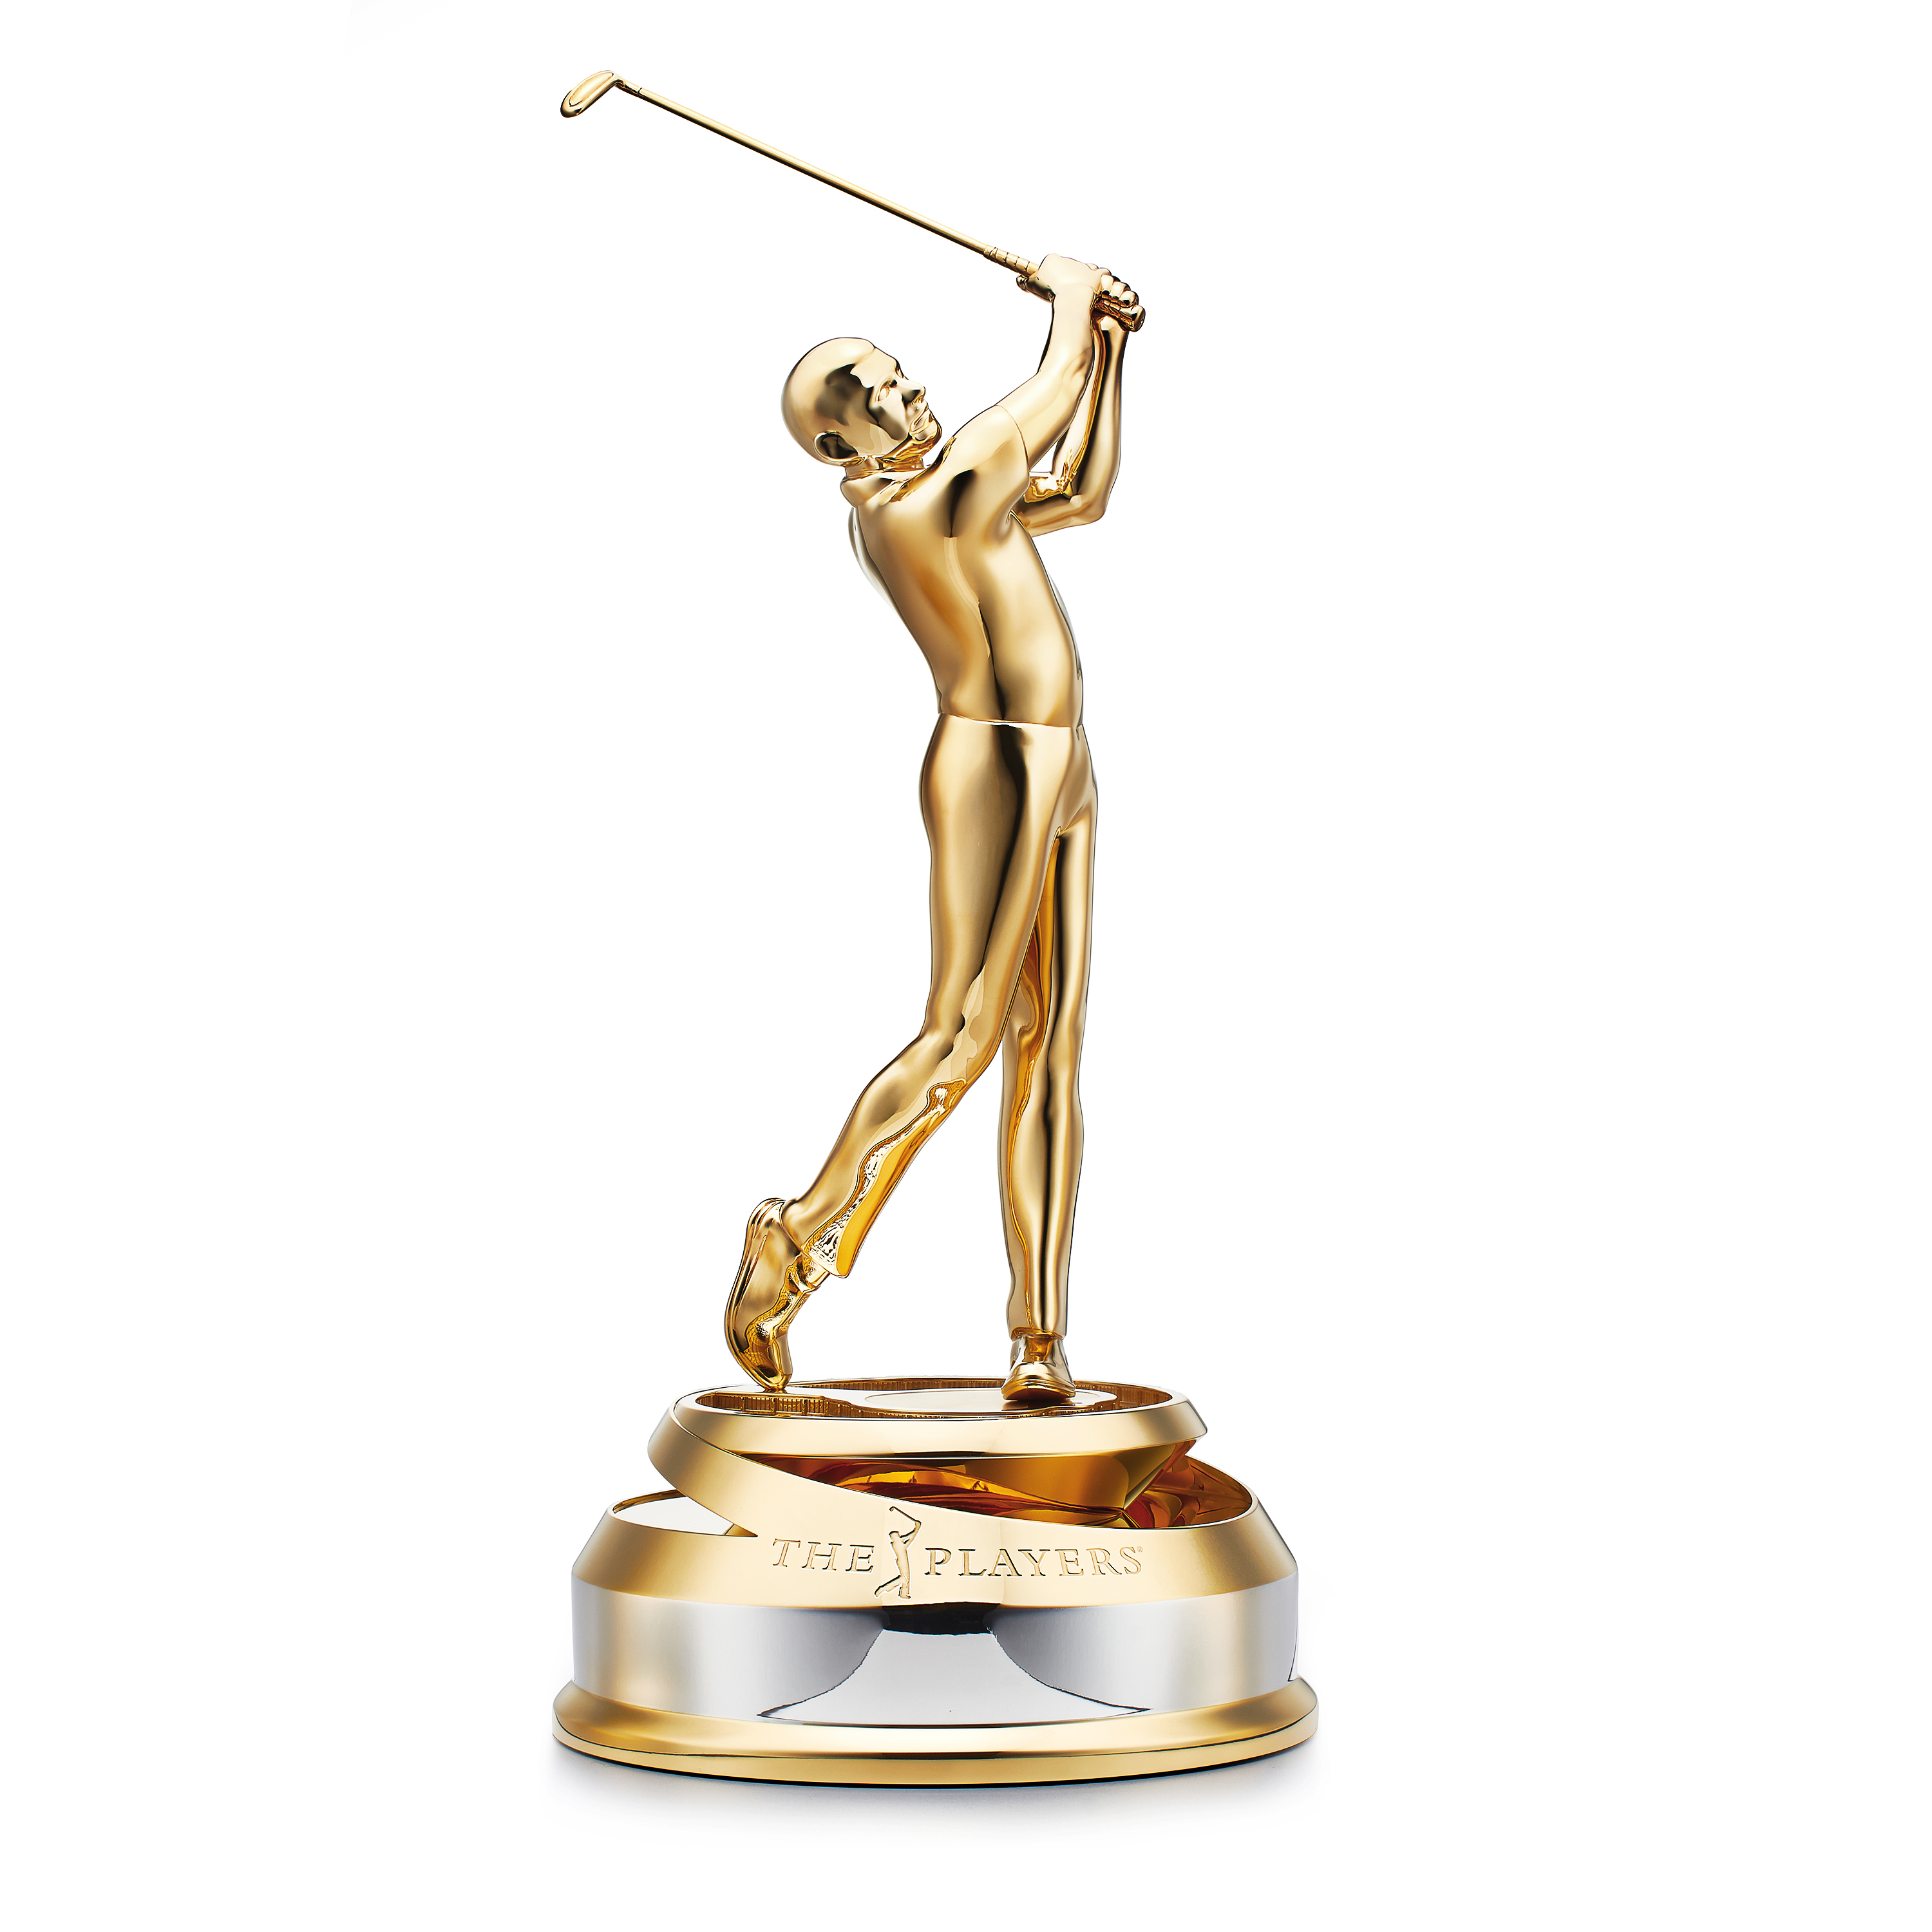 THE PLAYERS Championship Trophy®. Designed and handcrafted by Tiffany